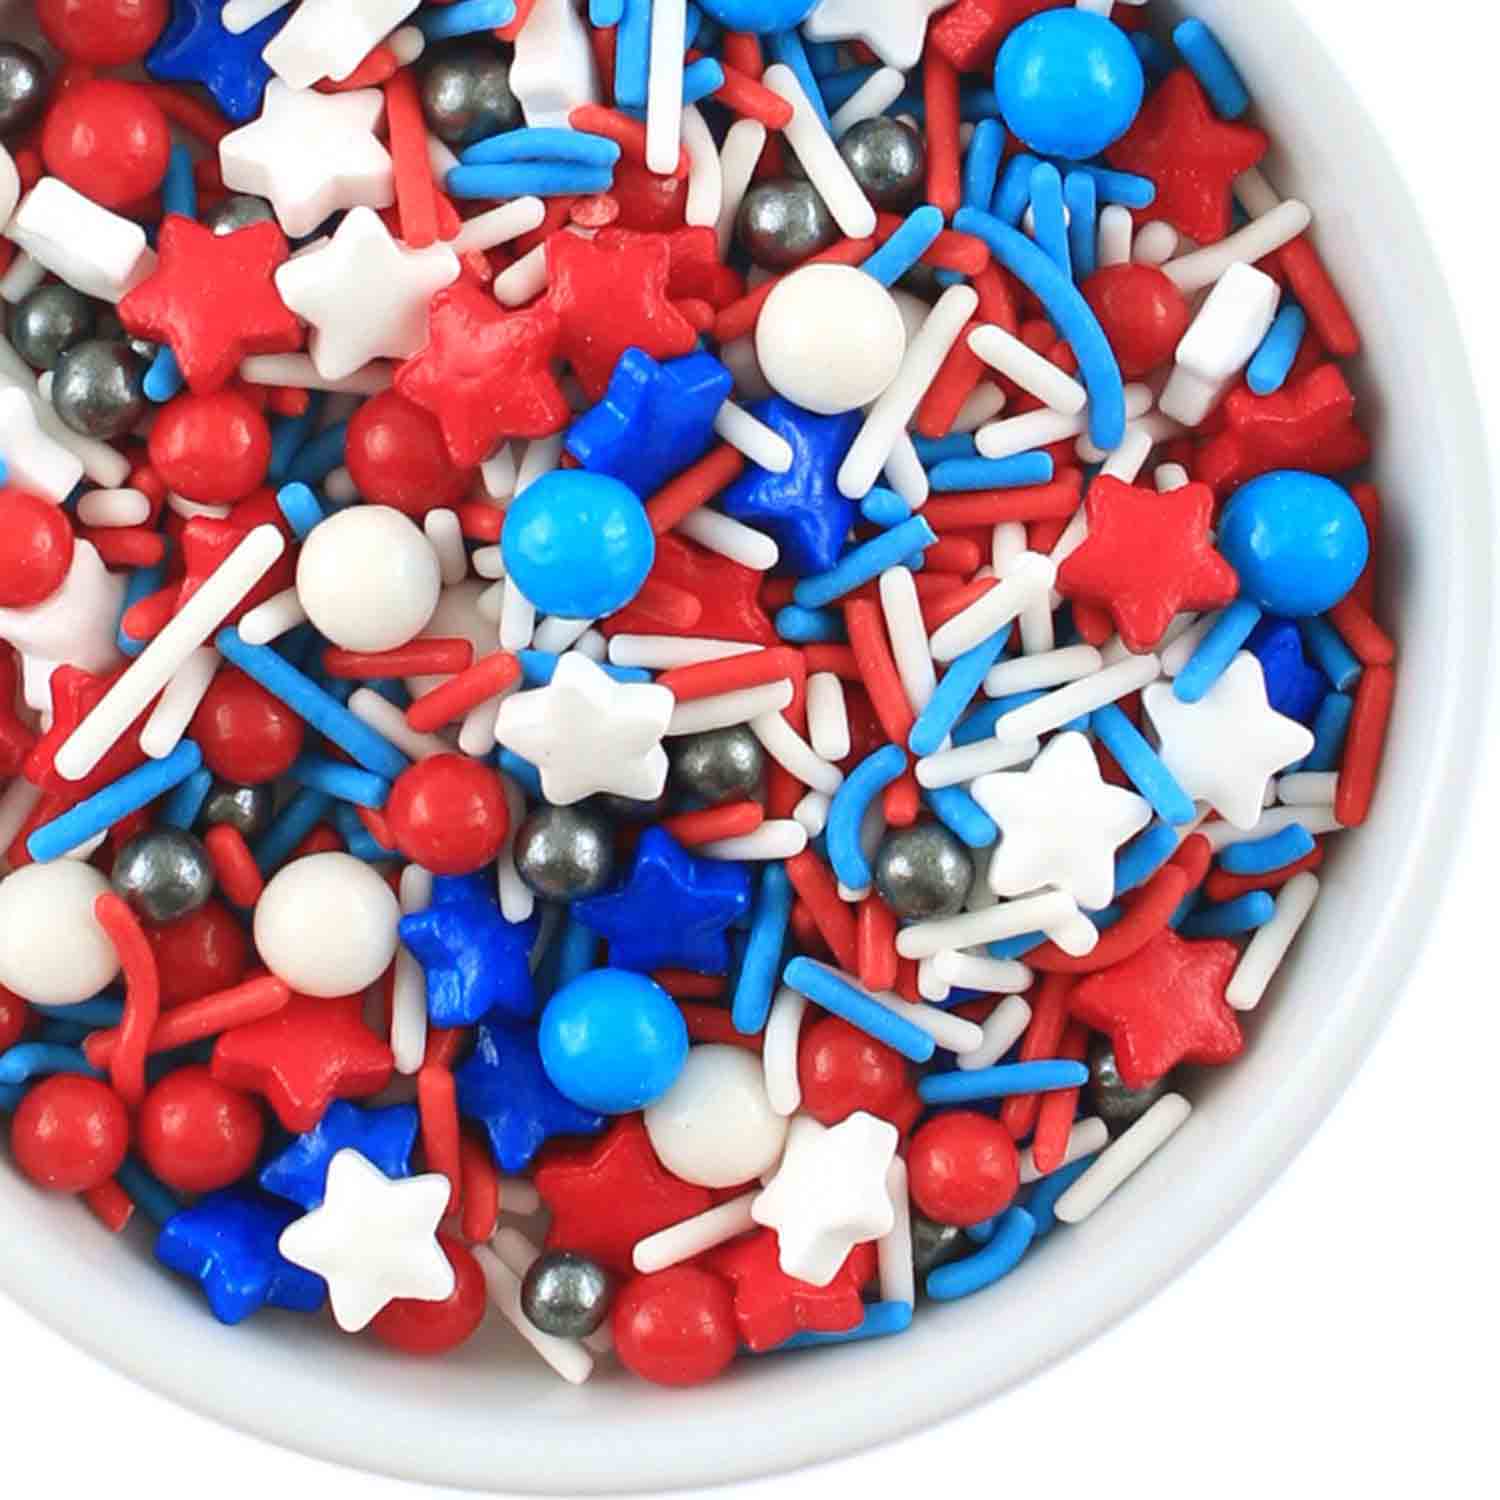 Red, white and blue sprinkles.